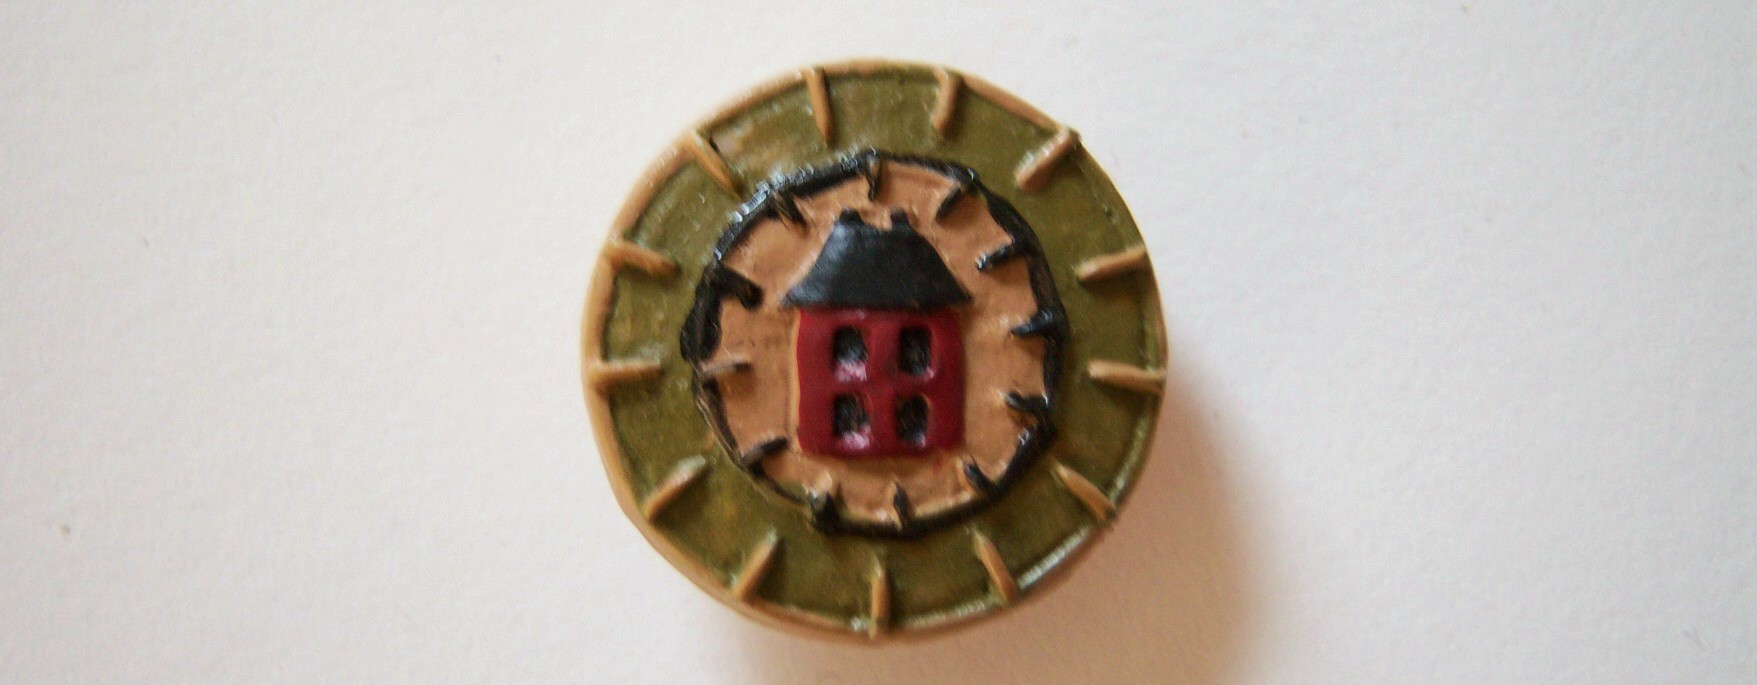 JHB round double border blanket stitched house in center 7/8" shank back poly resin  button.